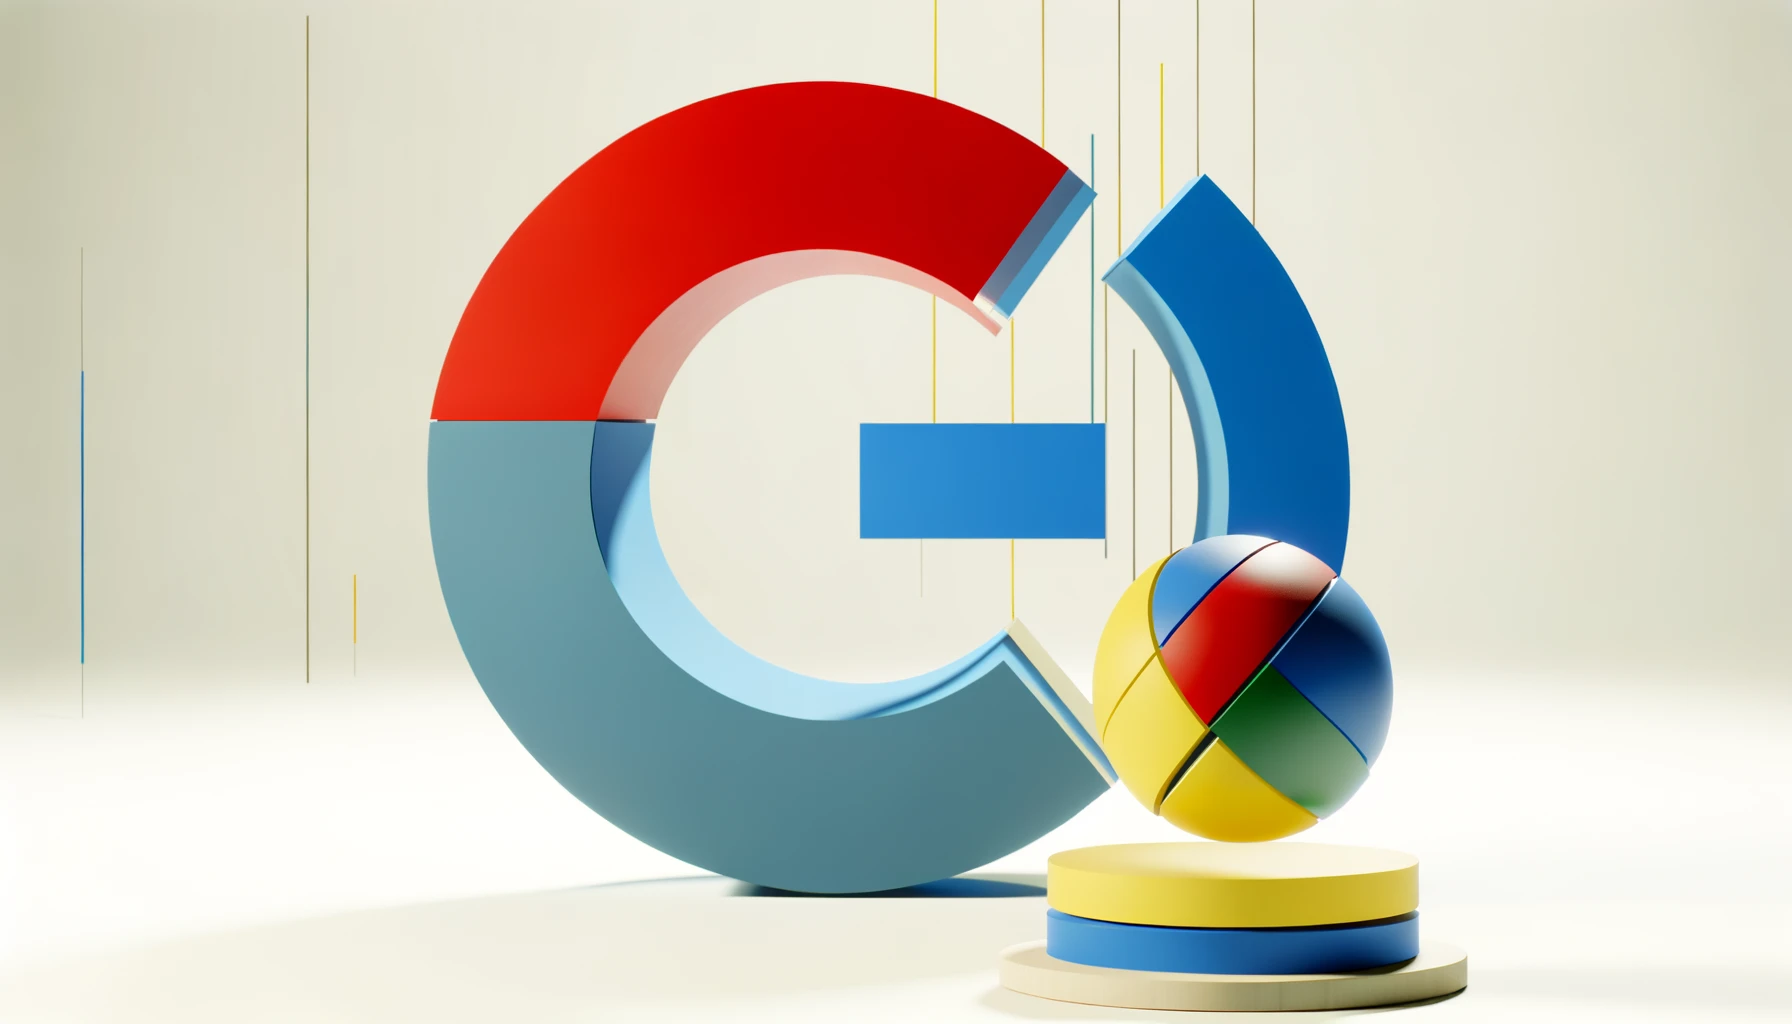 The images above present a 3D stock representation of Google's brand essence, featuring a minimalist and modern aesthetic with Google's iconic primary color scheme.